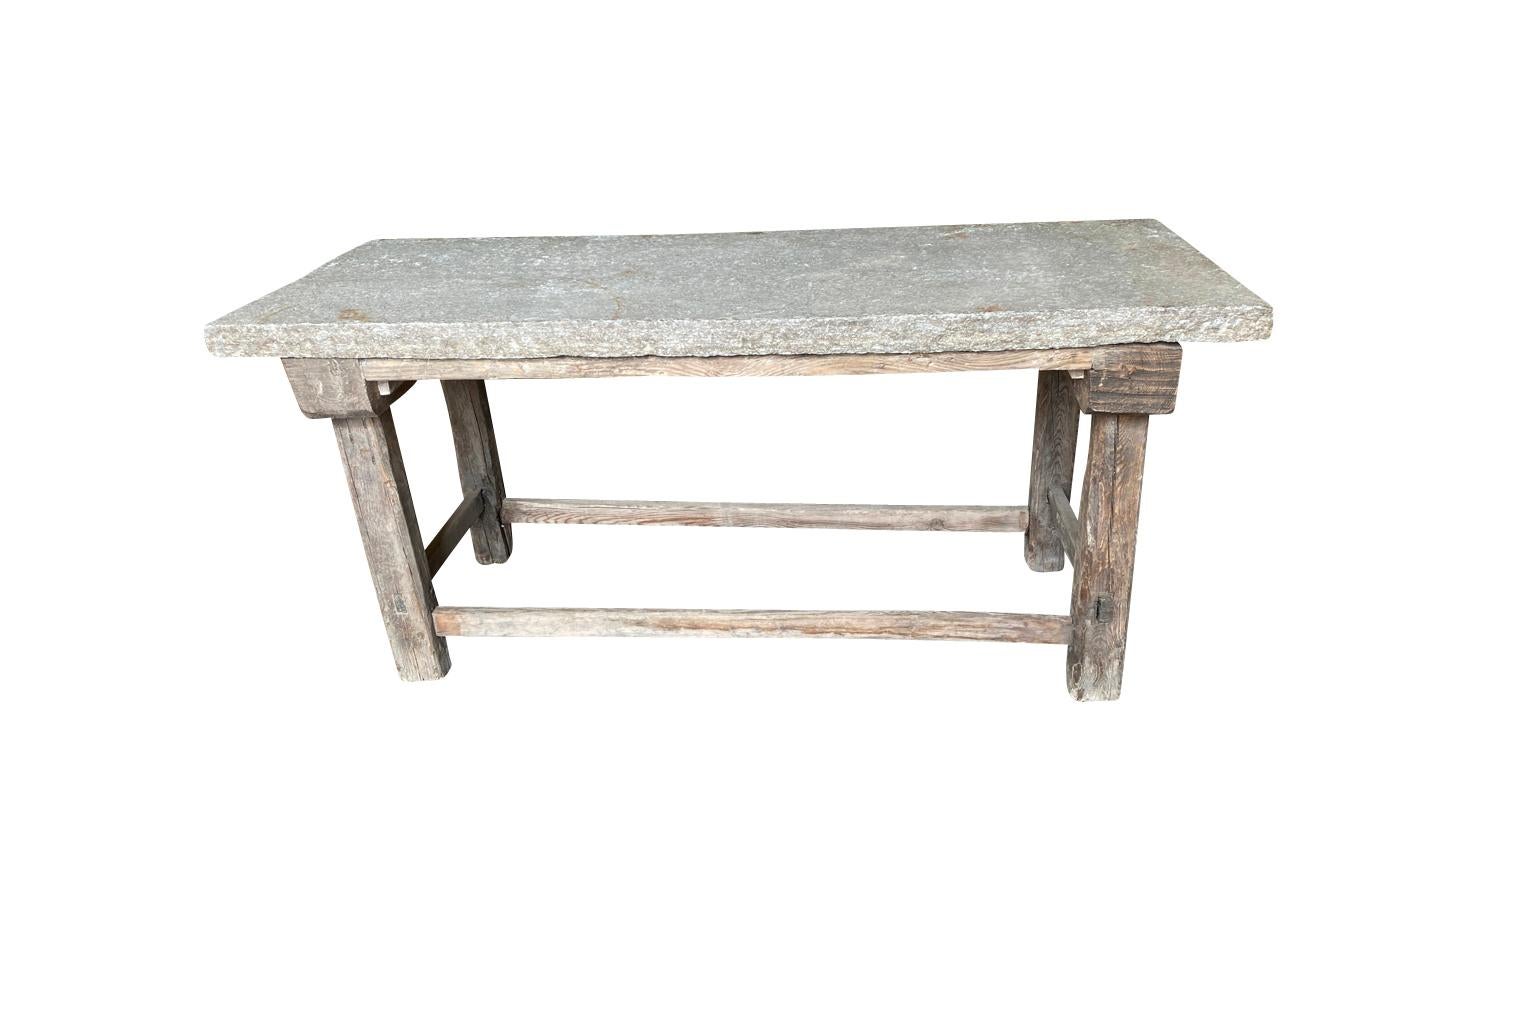 A terrific early 19th century primitive work table - console from the Ardeche region of France. Wonderfully constructed from a naturally washed pine and an impressive thick stone top. Perfect as a kitchen island, a potting table or console.